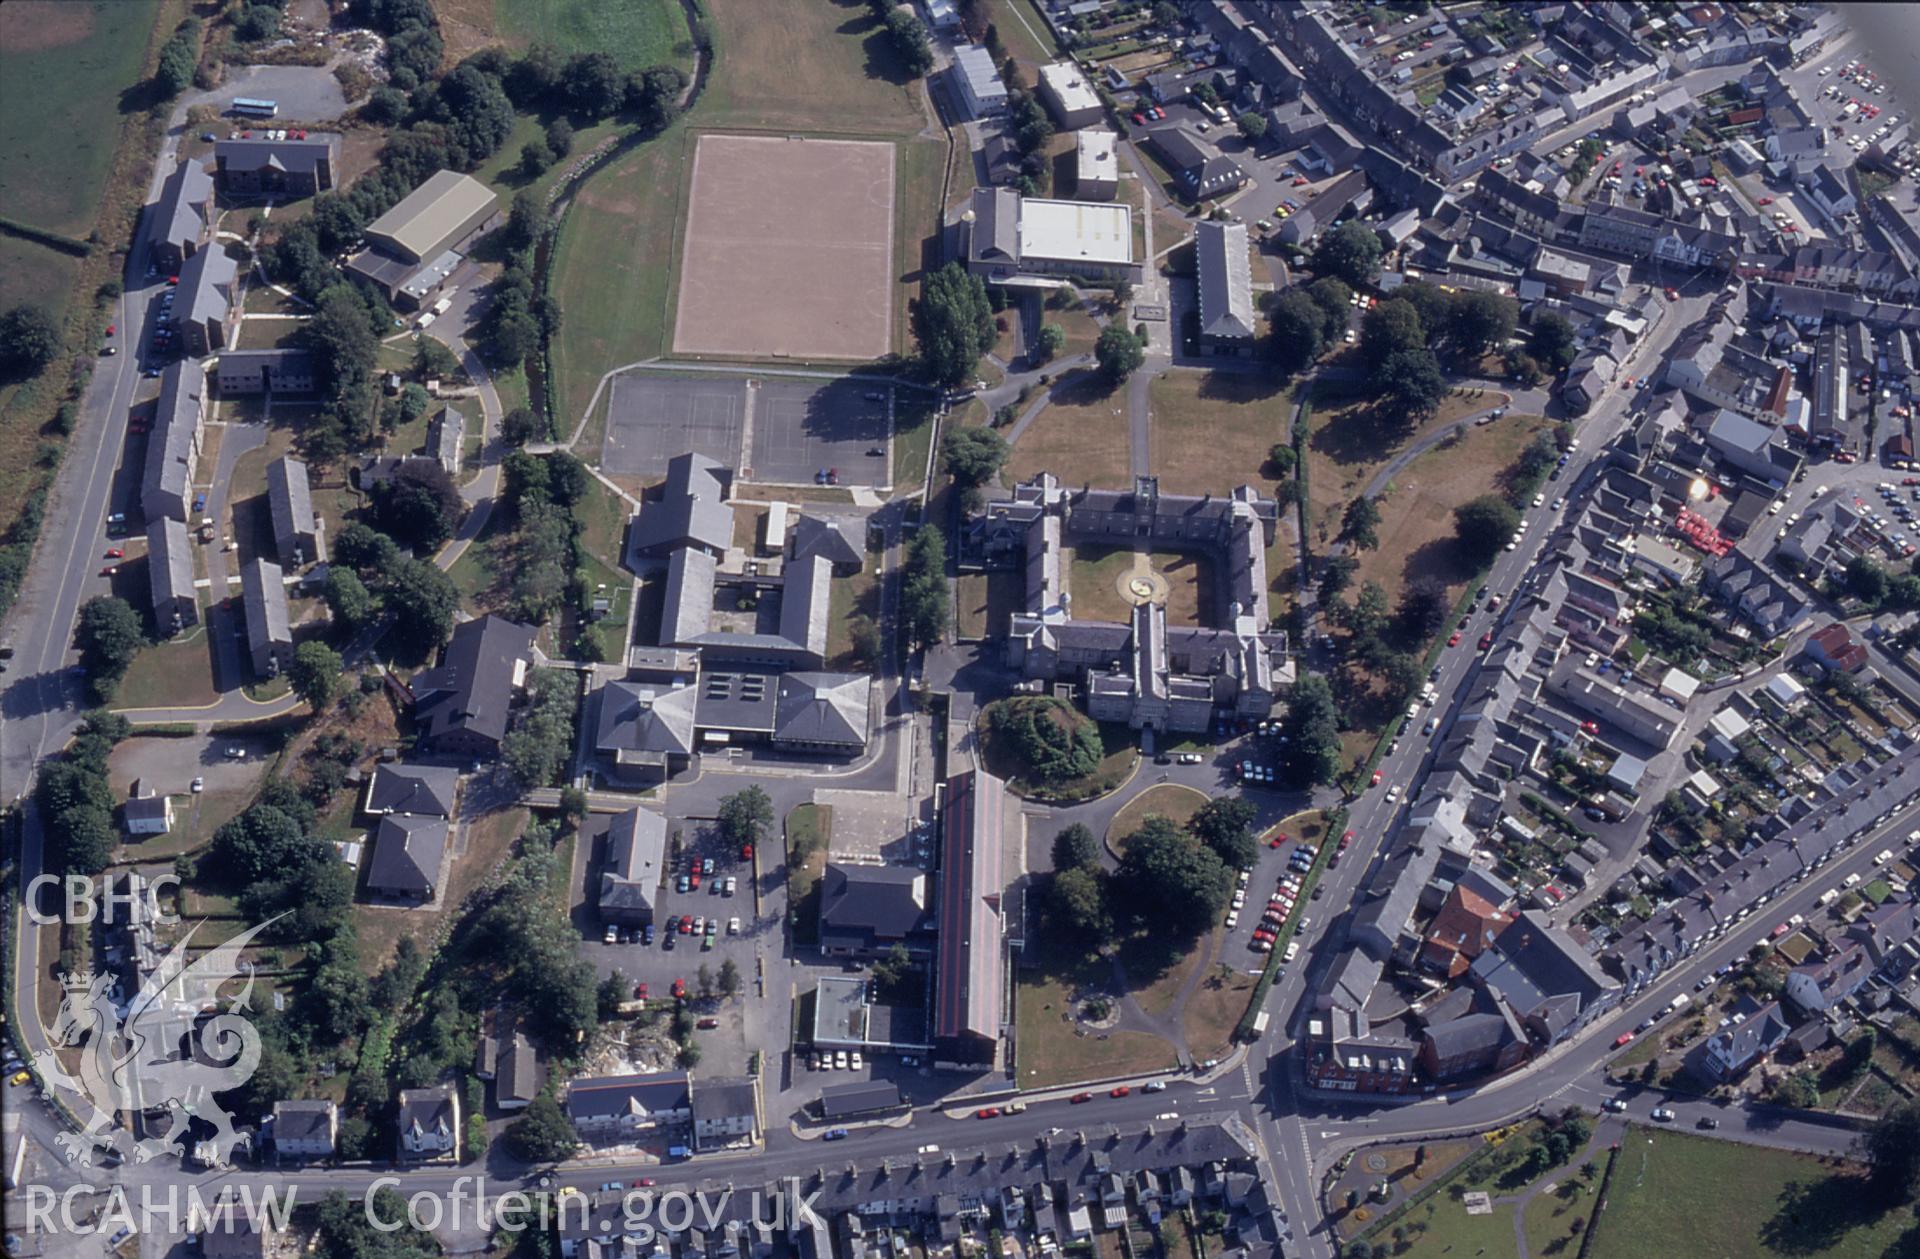 Slide of RCAHMW colour oblique aerial photograph of St David's College, Lampeter, taken by C.R. Musson, 23/8/1995.